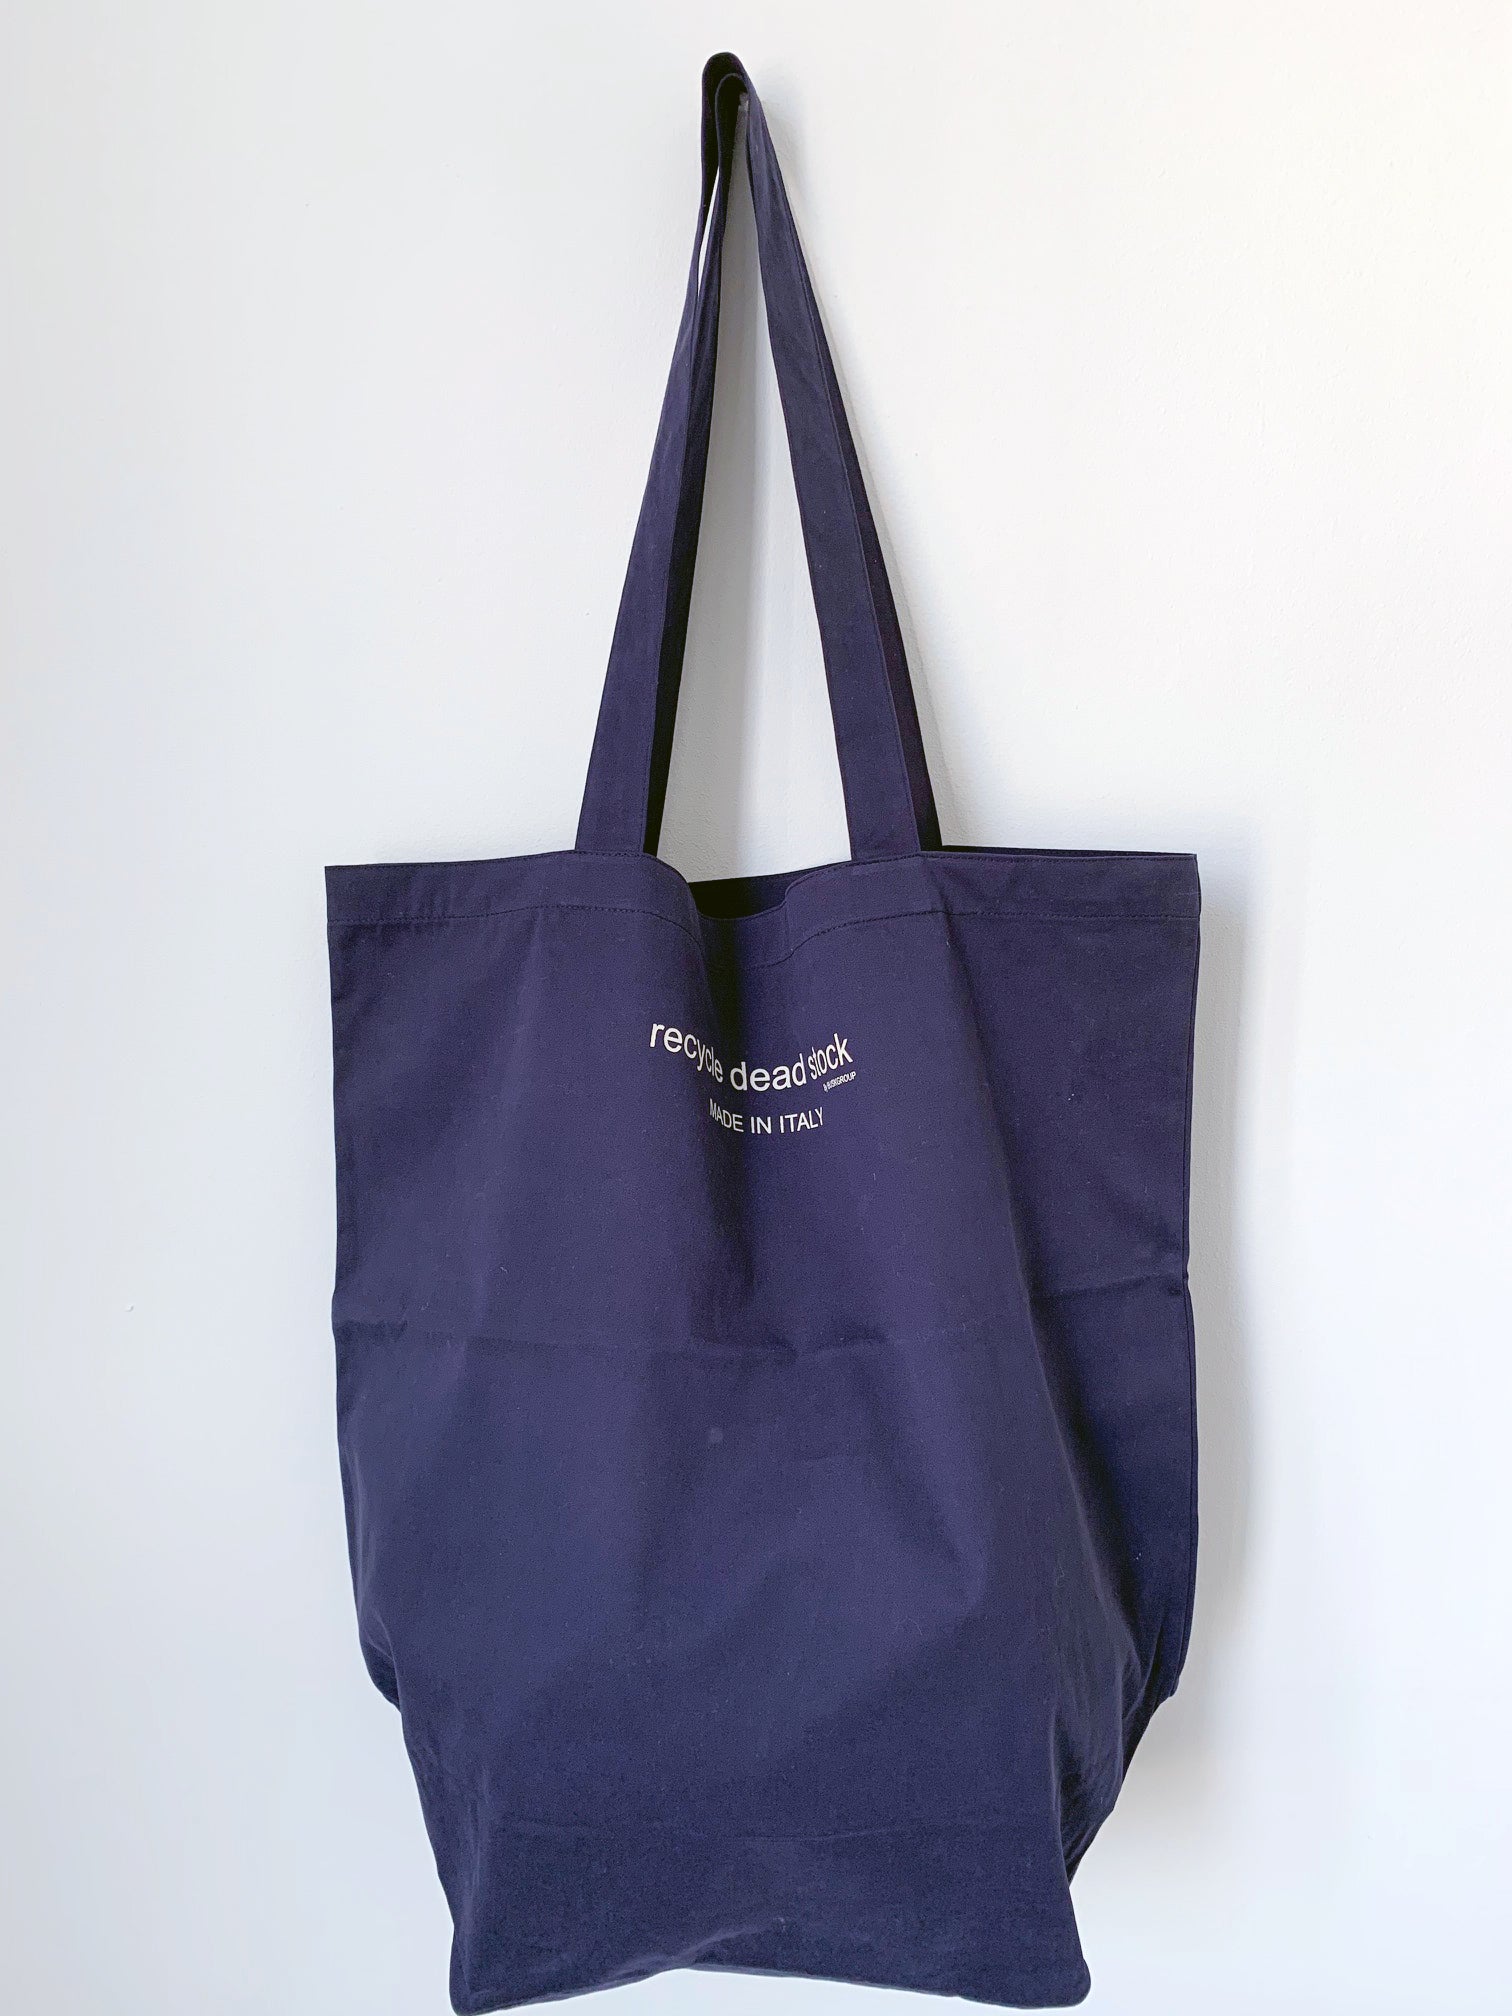 Recycle Dead Stock // Bag // Warm Navy